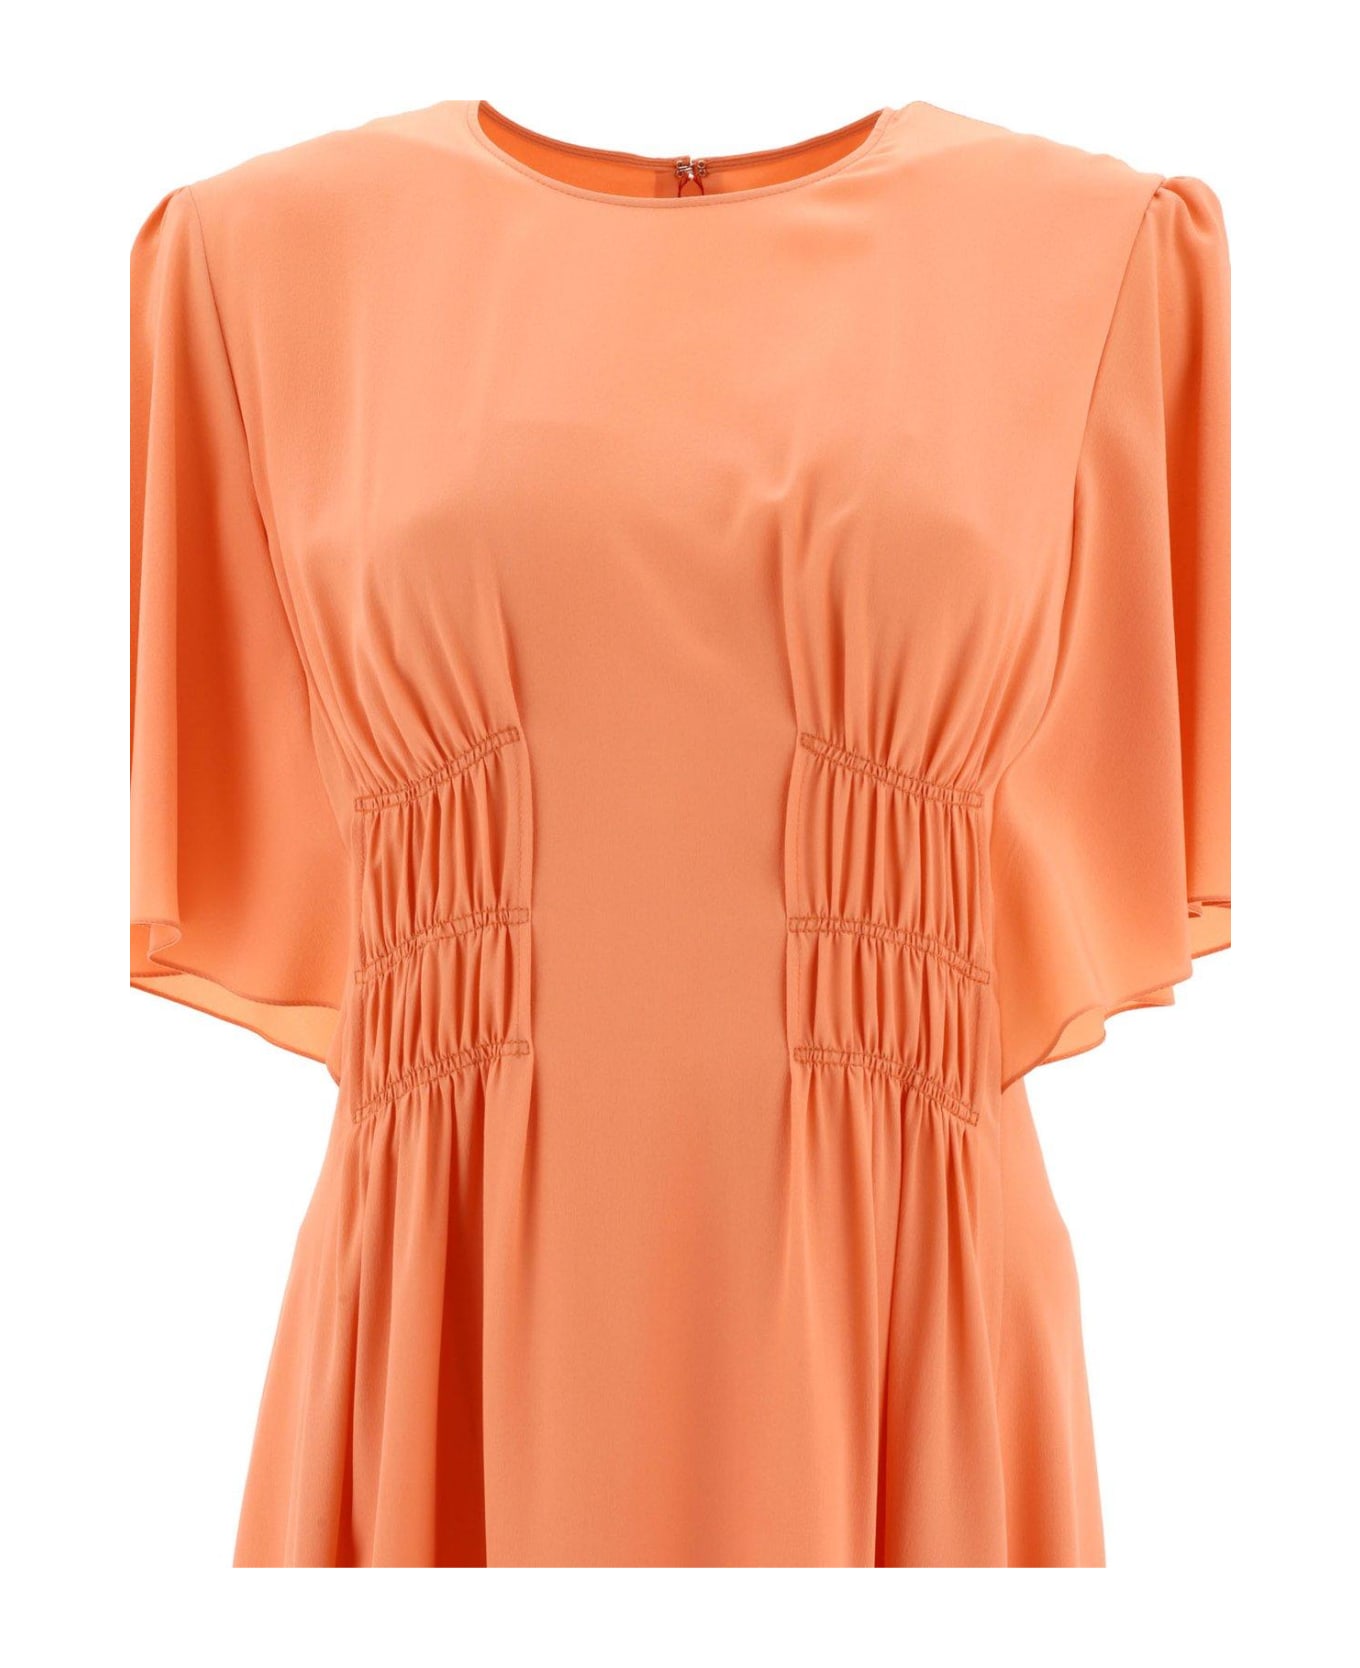 Chloé Flared Dress With Cap Sleeves - Pink